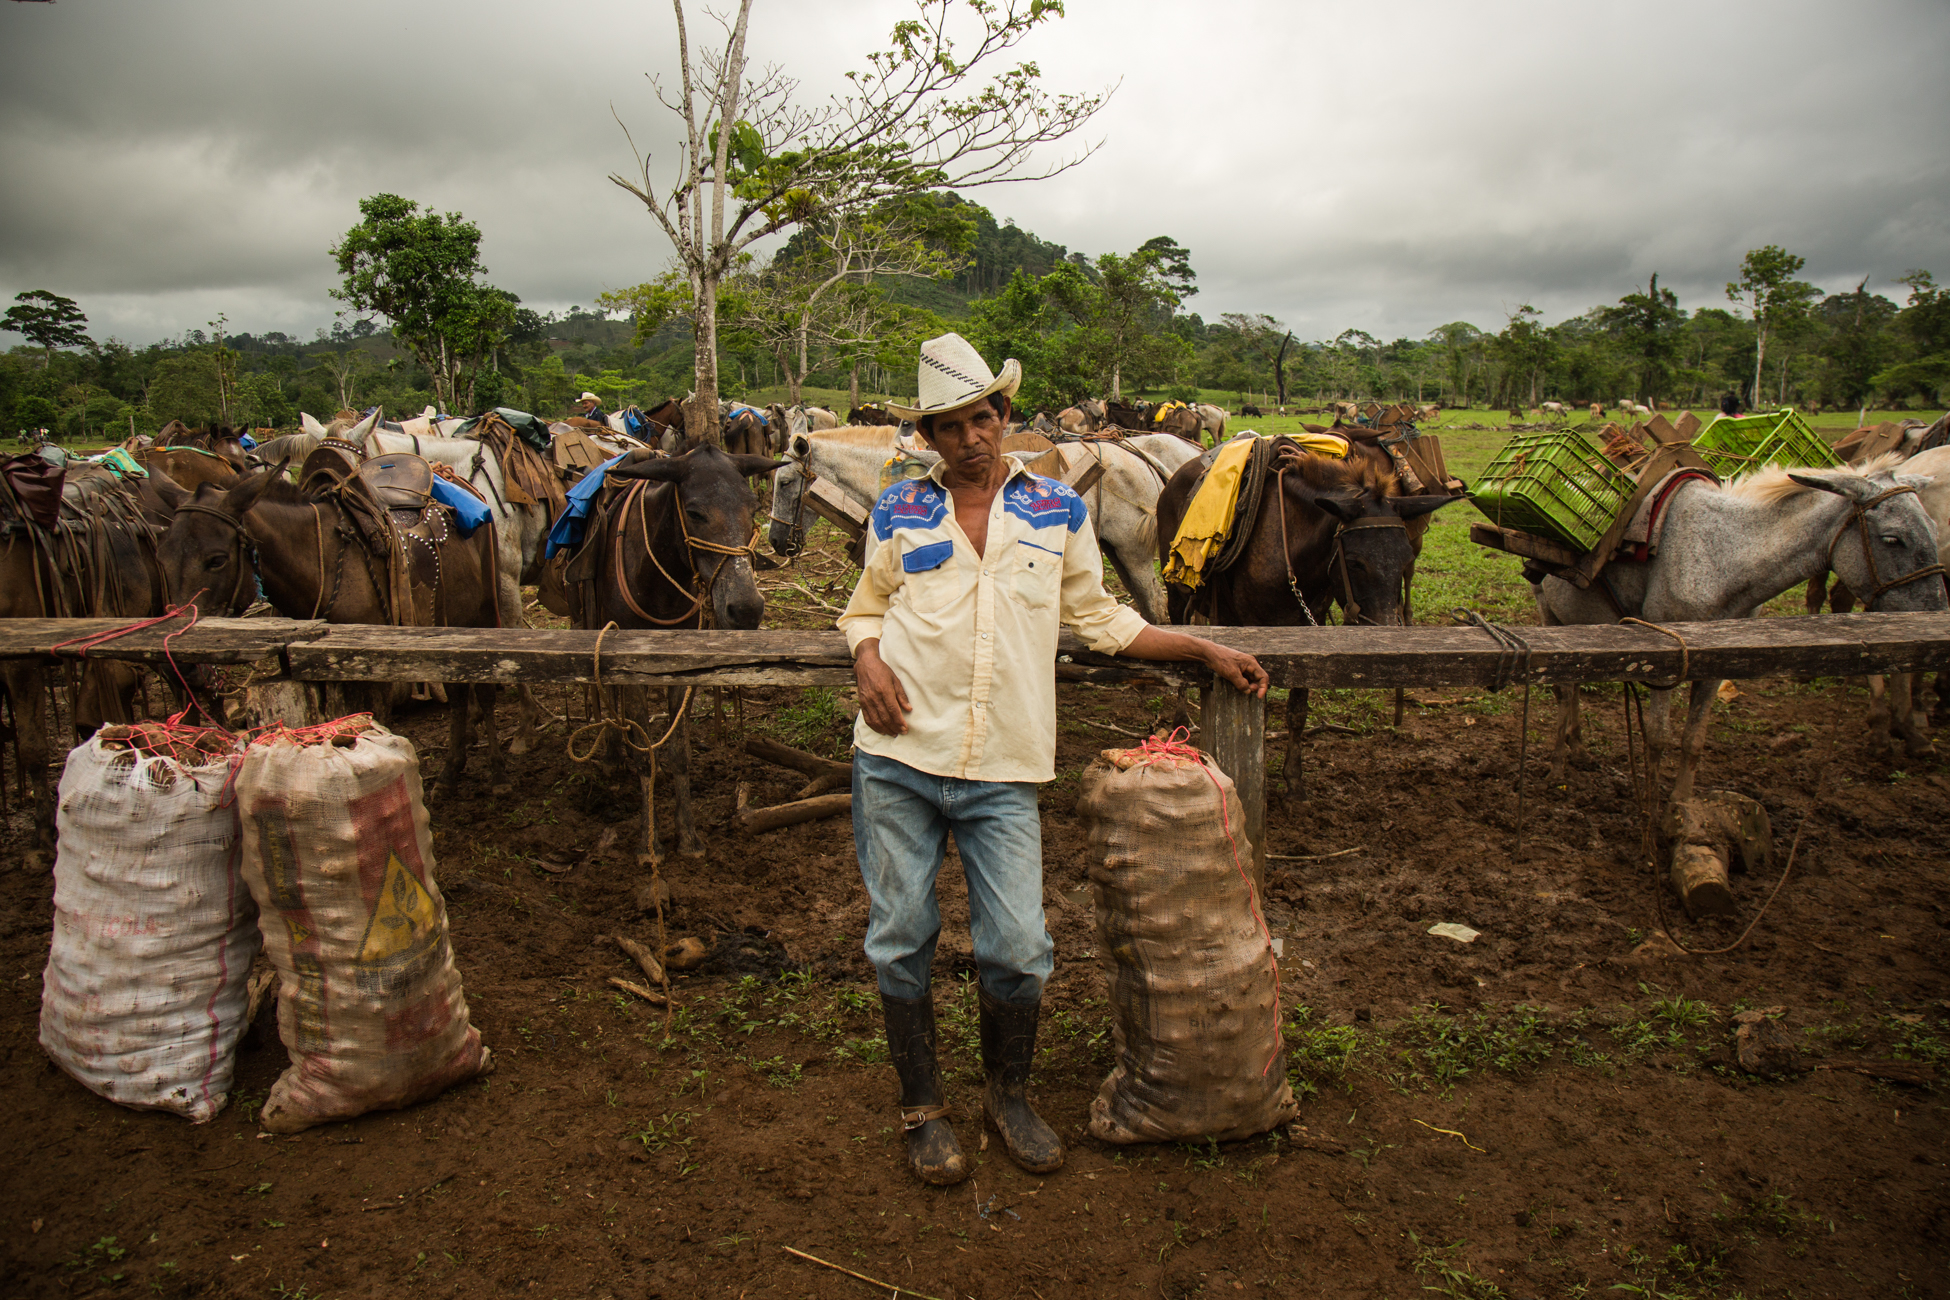  Esteban Fajardo, 60, of Provenir RAAS, with his horses where he has come to sell products at a market day in Palo Bonito on the banks of the Punta Gorda river in the early morning. If the Gran Canal project were to go forward, the river would be dre